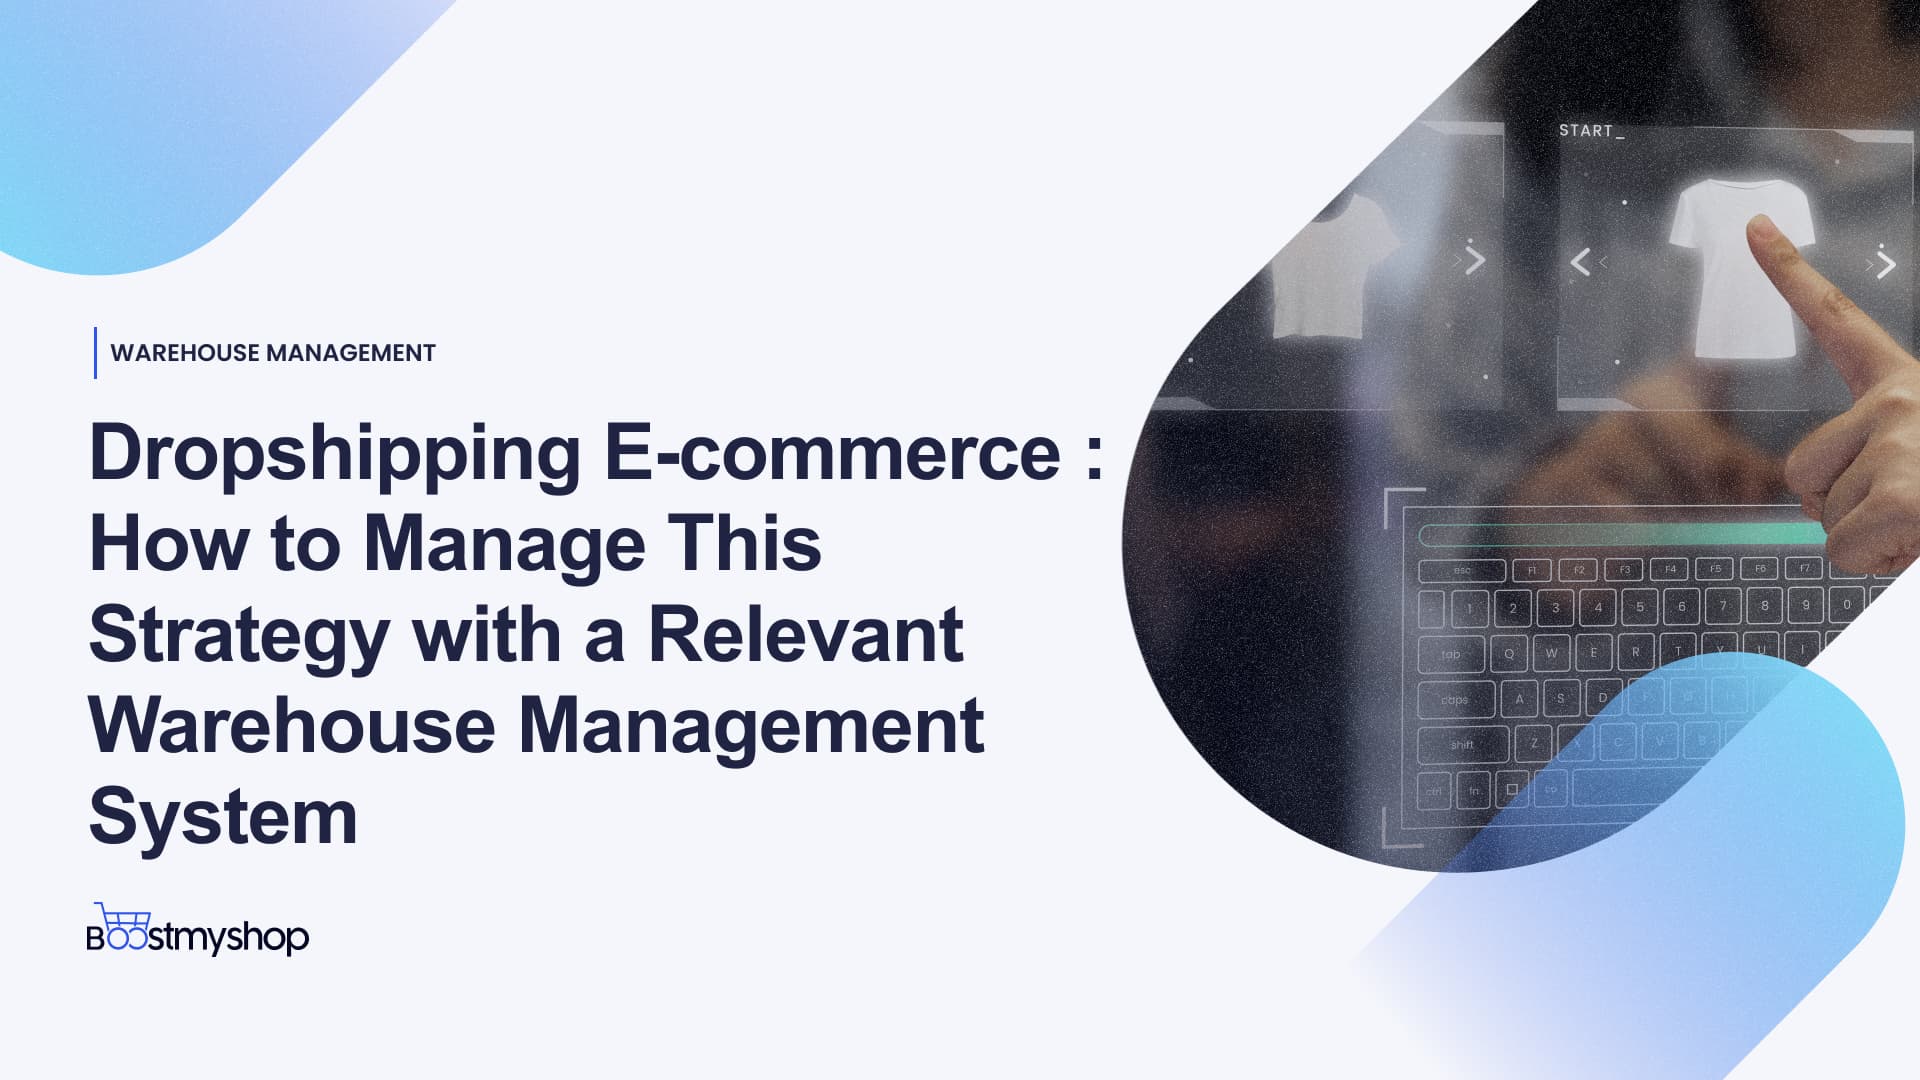 Dropshipping E-commerce and Warehouse Management System